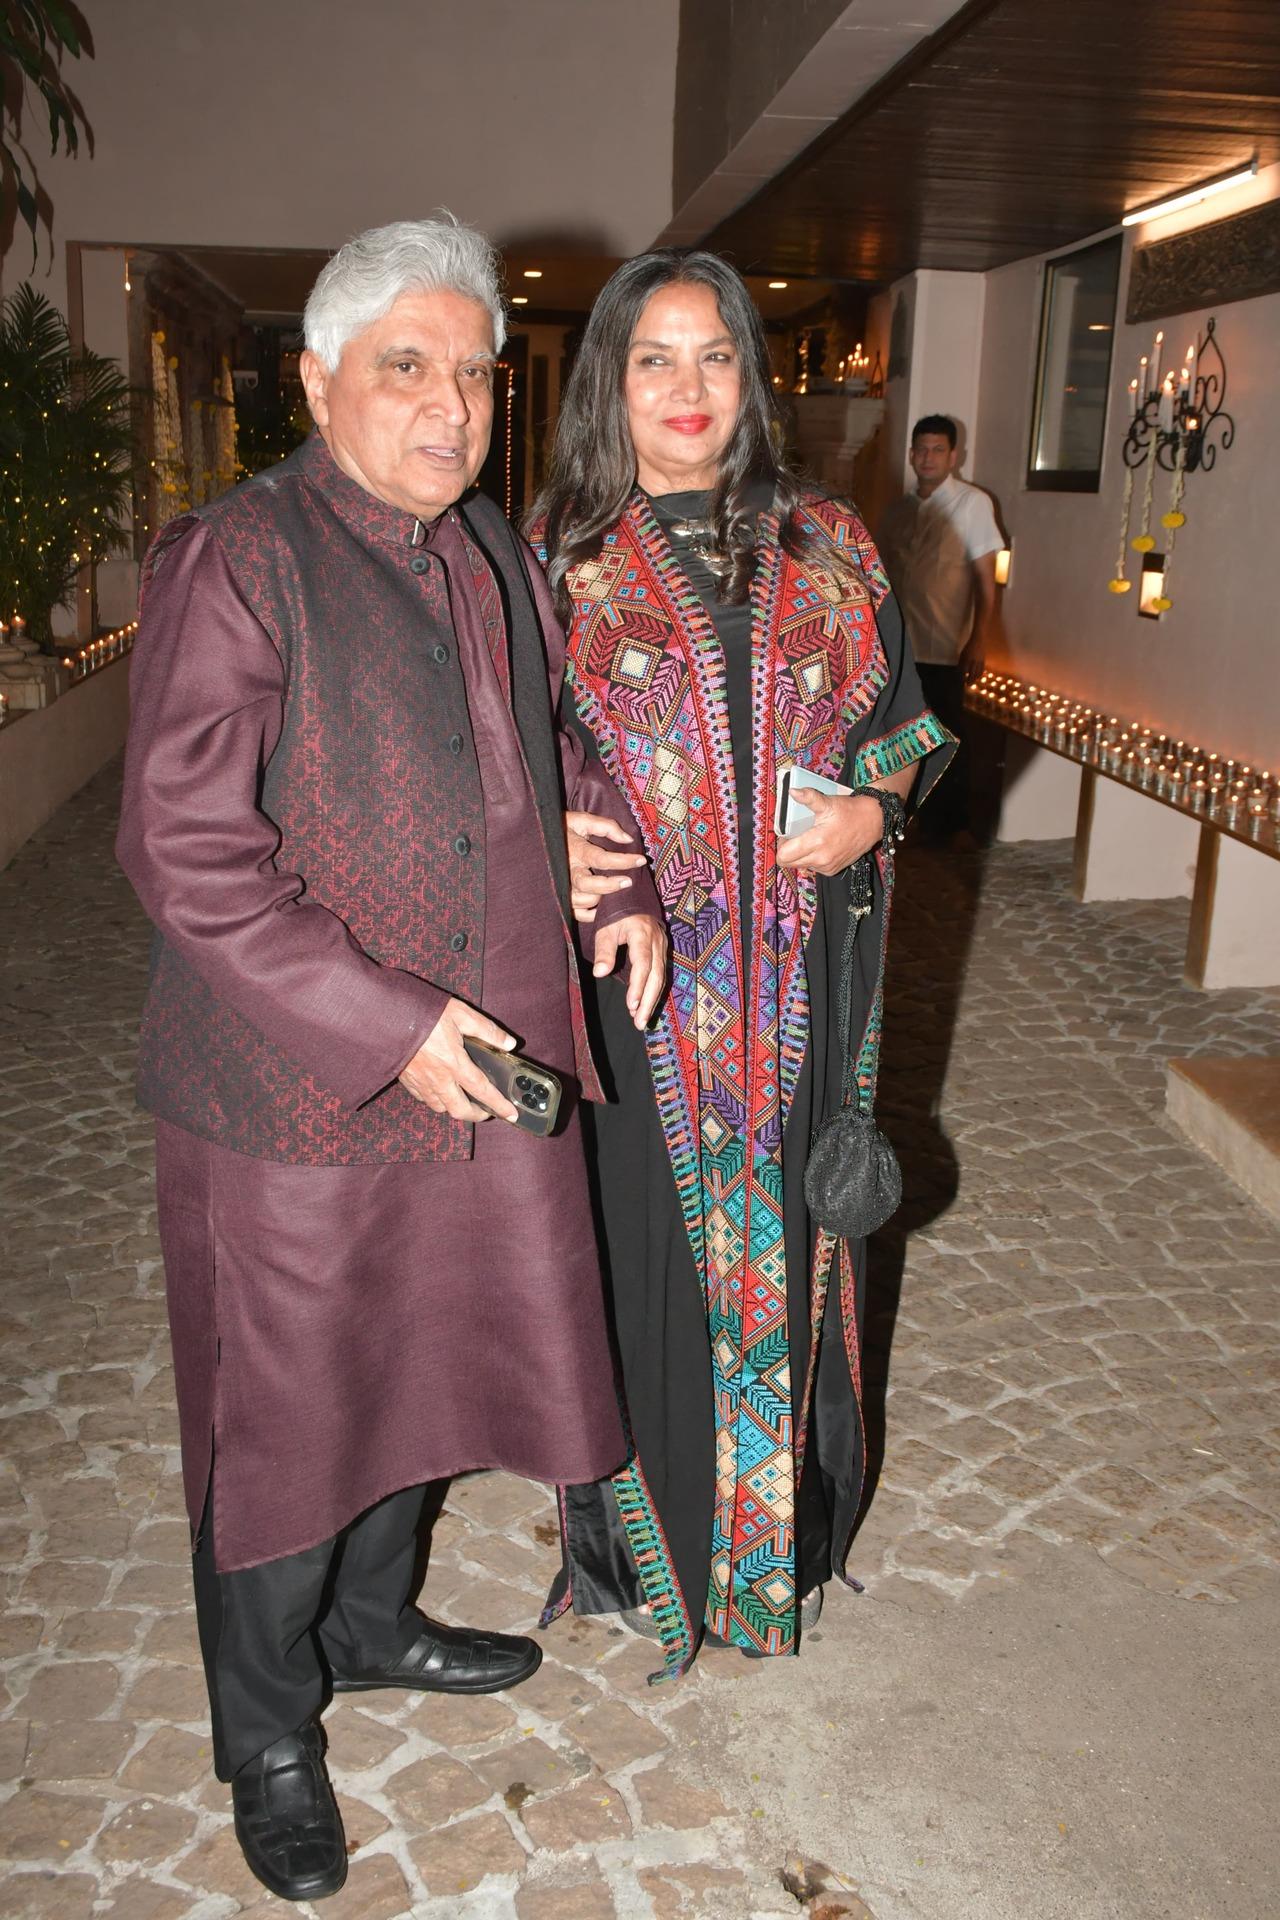 Javed Akhtar opted for a purple kurta and jacket for the party as he arrived with his wife and actress Shabana Azmi